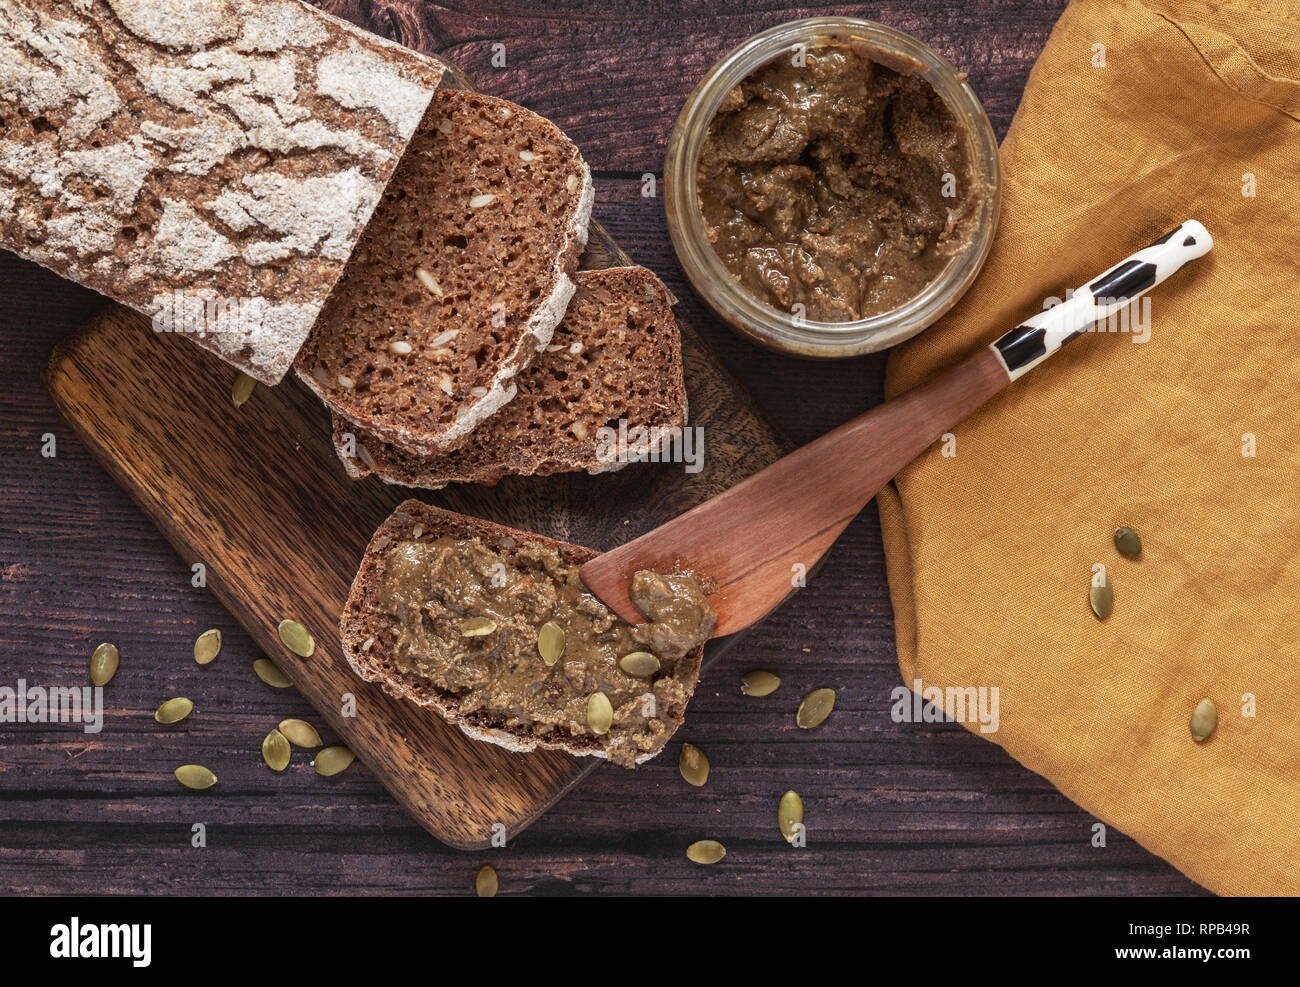 Homemade rye bread with homemade pumpkin seed spread on wooden breadboard Stock Photo